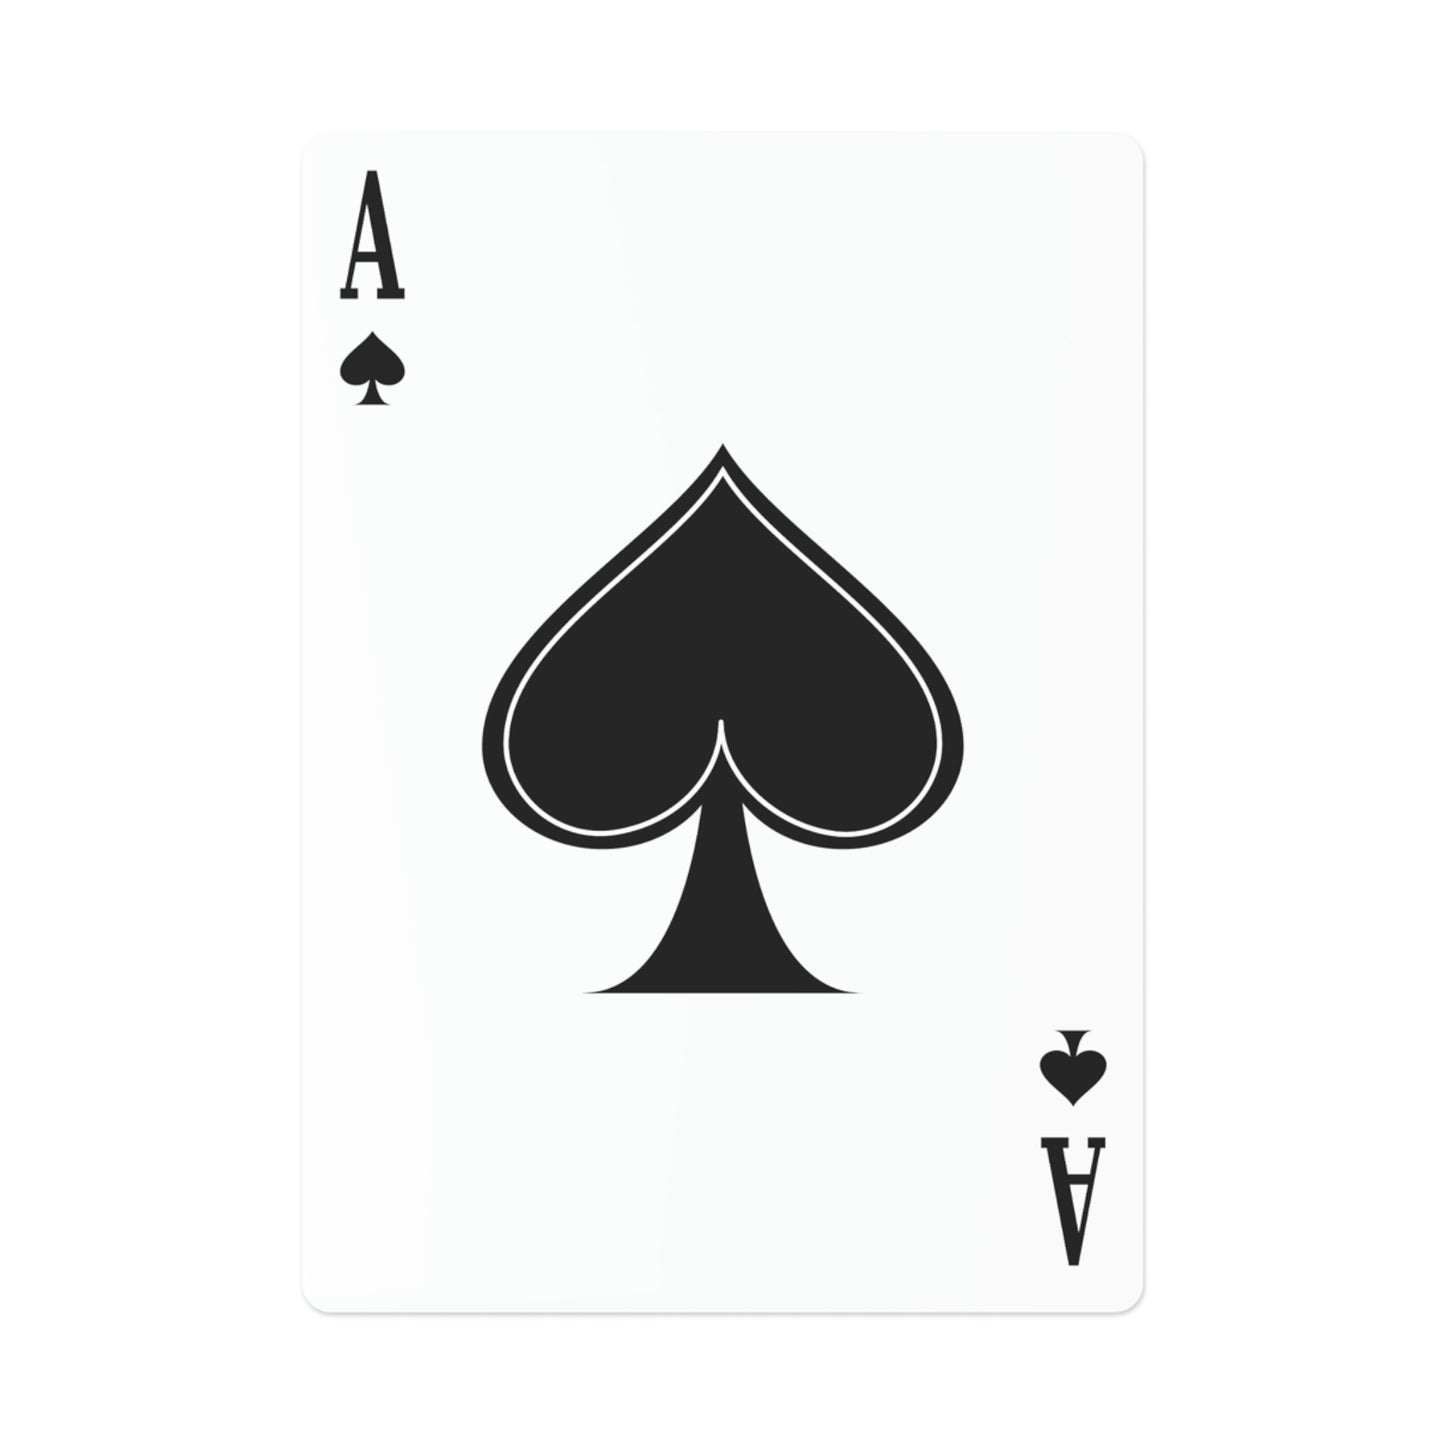 The Circus Affair - Playing Cards